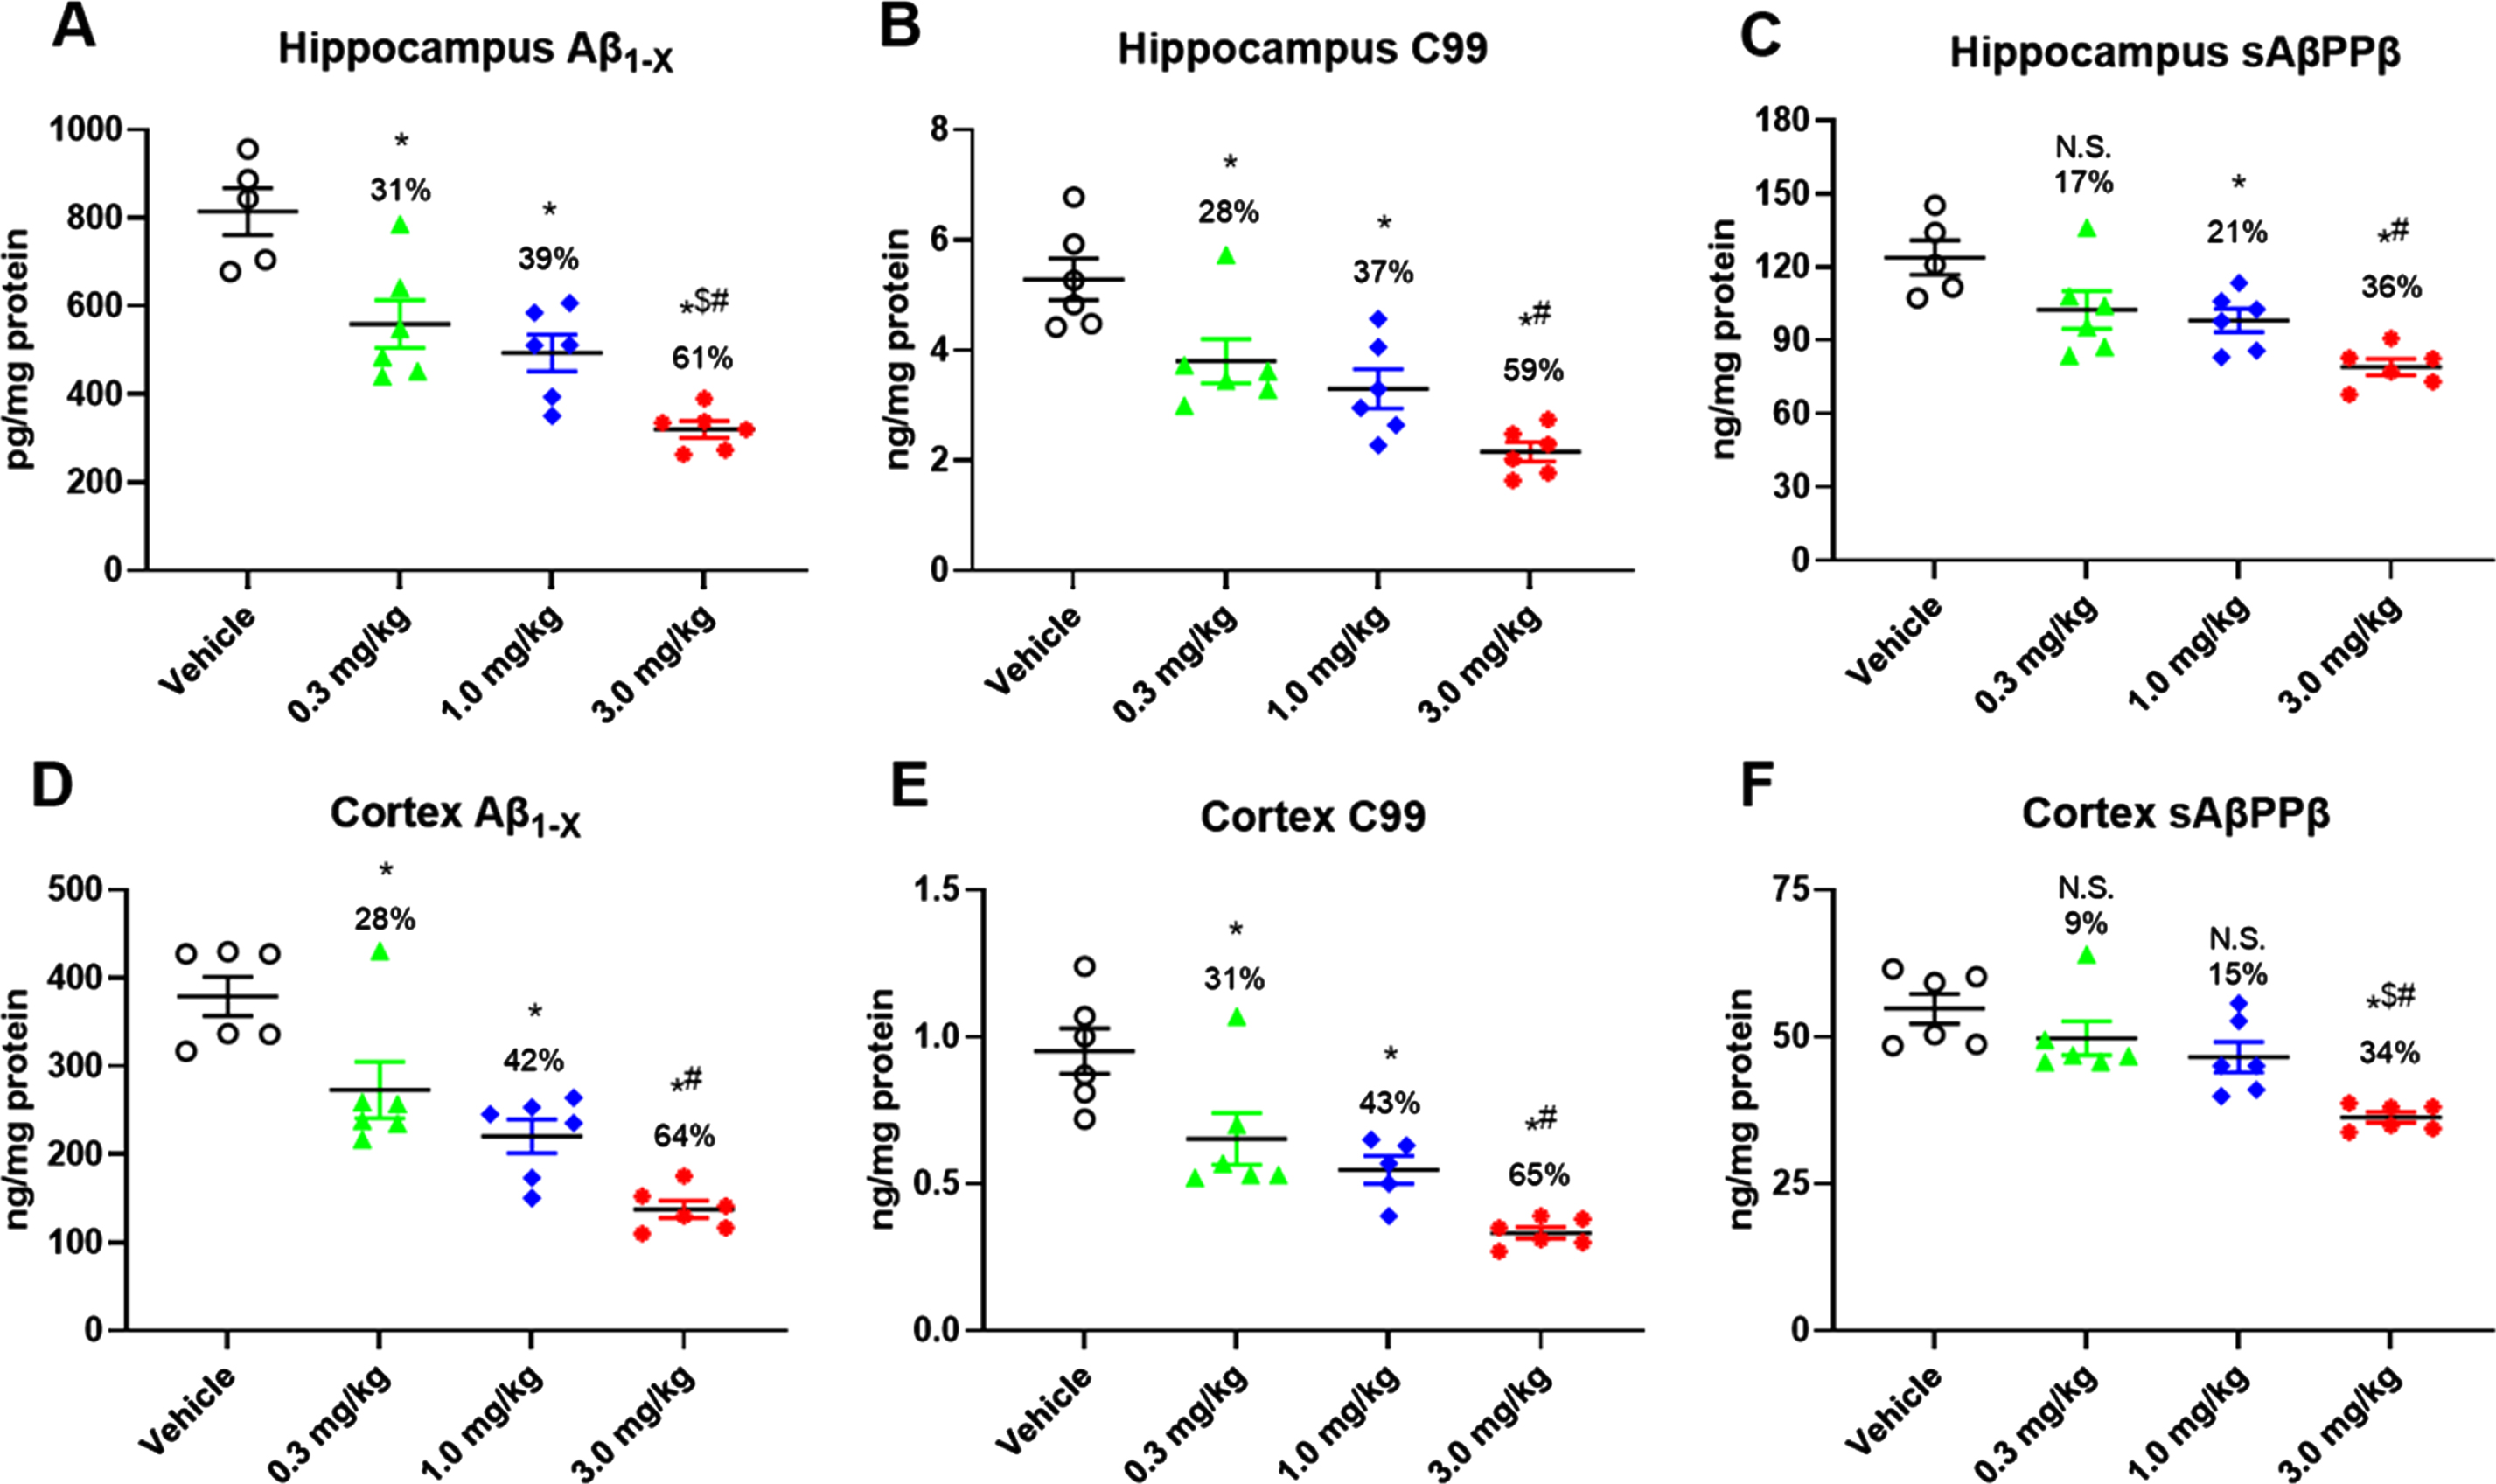 Pharmacologic effects in vivo of oral administration of LY3202626. Young PDAPP mice (n = 6–8 per group) were treated orally by gavage with increasing doses of LY3202626 or vehicle, and hippocampal Aβ1hboxx (A), C99 (B), and sAβPPβ (C) as well as cortical Aβ1hboxx (D), C99 (E), and sAβPPβ (F) levels were determined from brain extracts obtained 3 h after dosing. LY2886721 produced dose-dependent decreases in all amyloid-β protein precursor-related pharmacodynamic markers of BACE1 inhibition in PDAPP mice. All ANOVA p-values were < 0.0001; Tukey post hoc analysis, *p < 0.05 versus vehicle control, $p < 0.05 versus 0.3 mg/kg, #p < 0.05 versus 1.0 mg/kg. p < 0.01 versus vehicle control, ANOVA/Dunnett’s post hoc analysis. Aβ, amyloid-β peptide; sAβPPβ, secreted amyloid-β protein precursor beta.